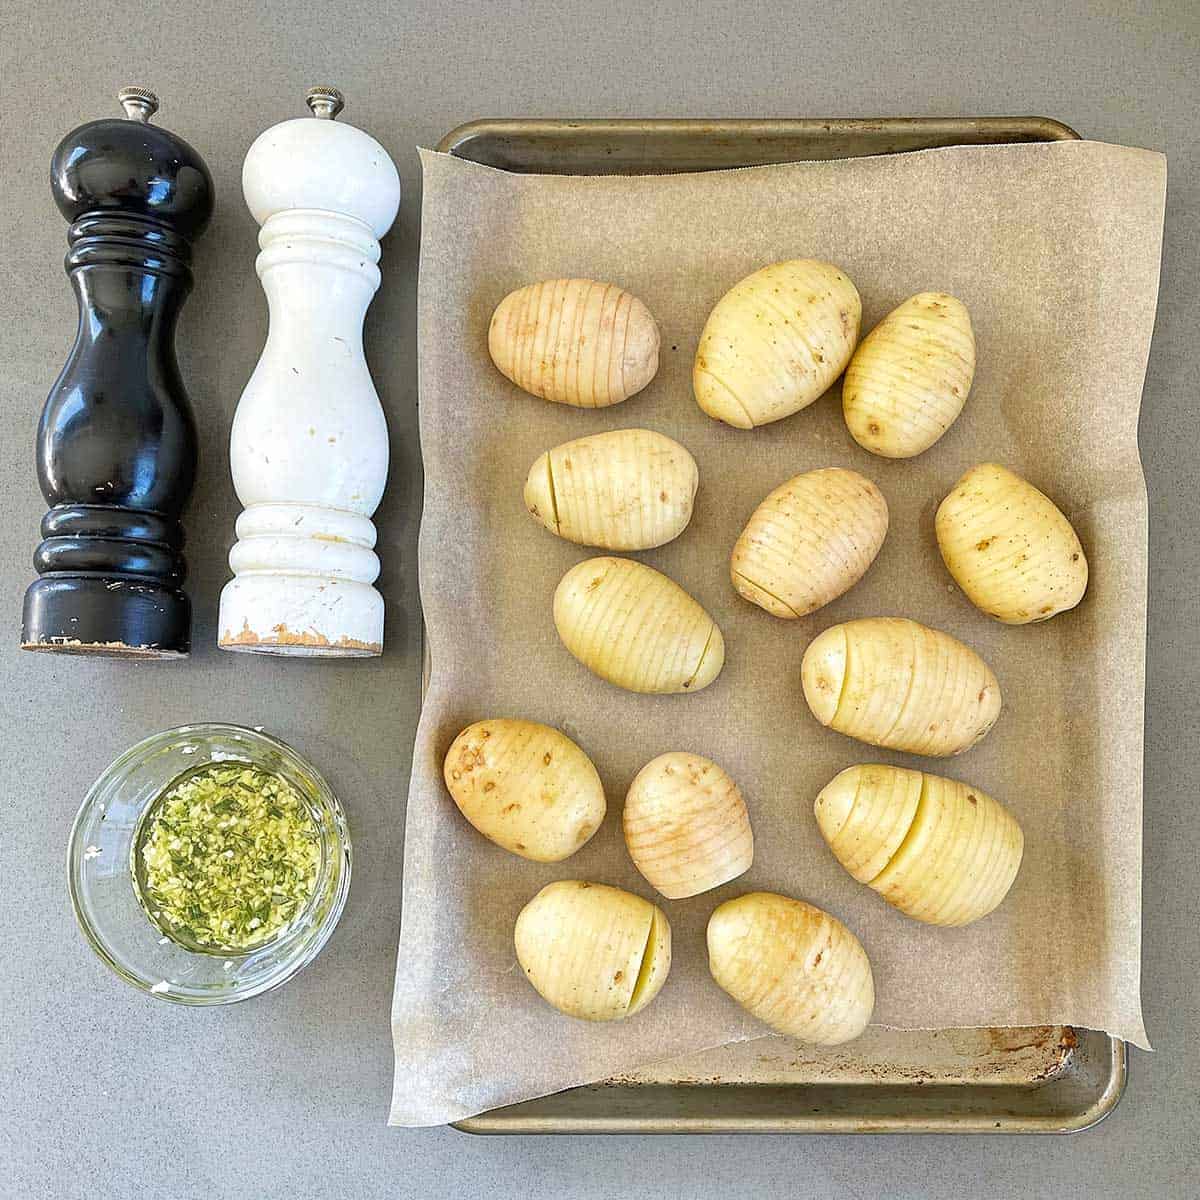 Sliced potatoes sitting on a lined baking tray next to salt and pepper grinders.